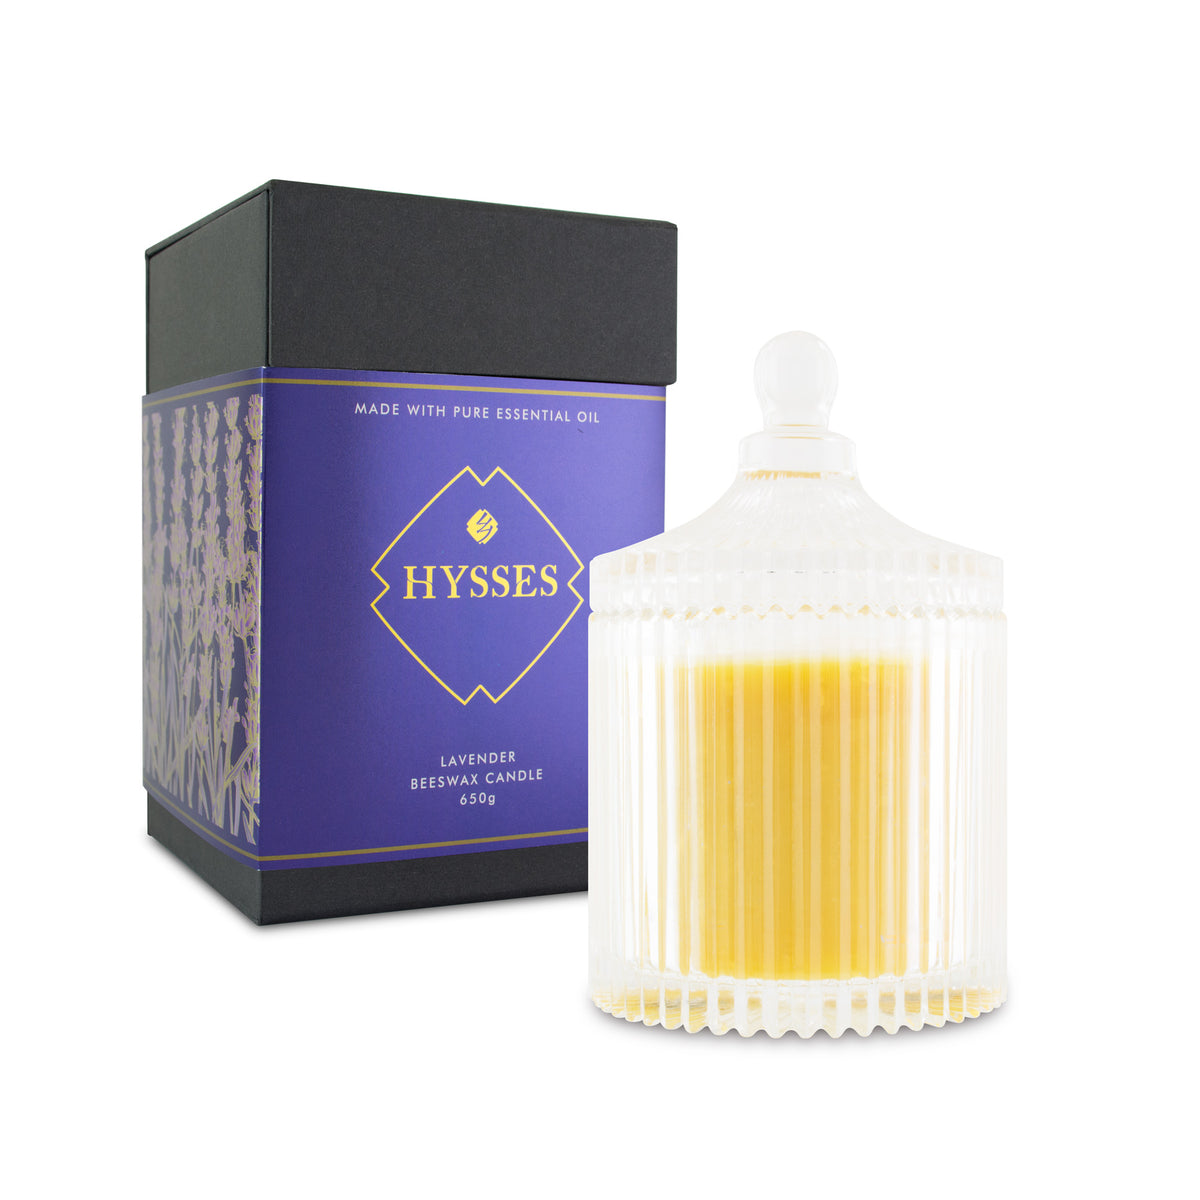 Lavender Beeswax Candle - HYSSES